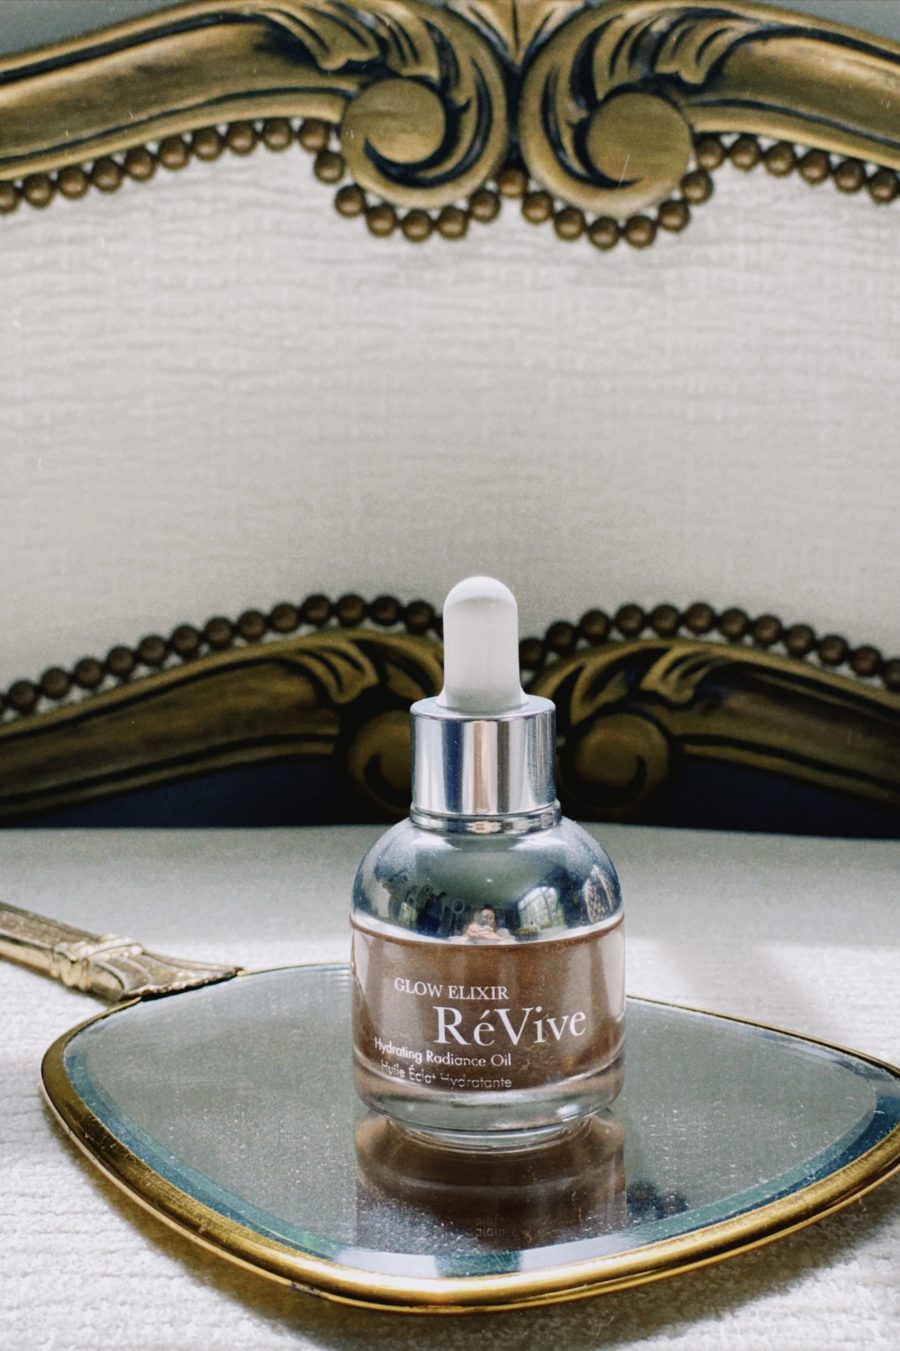 self-care guide featuring revive glow elixir // Jessica Wang - Notjessfashion.com